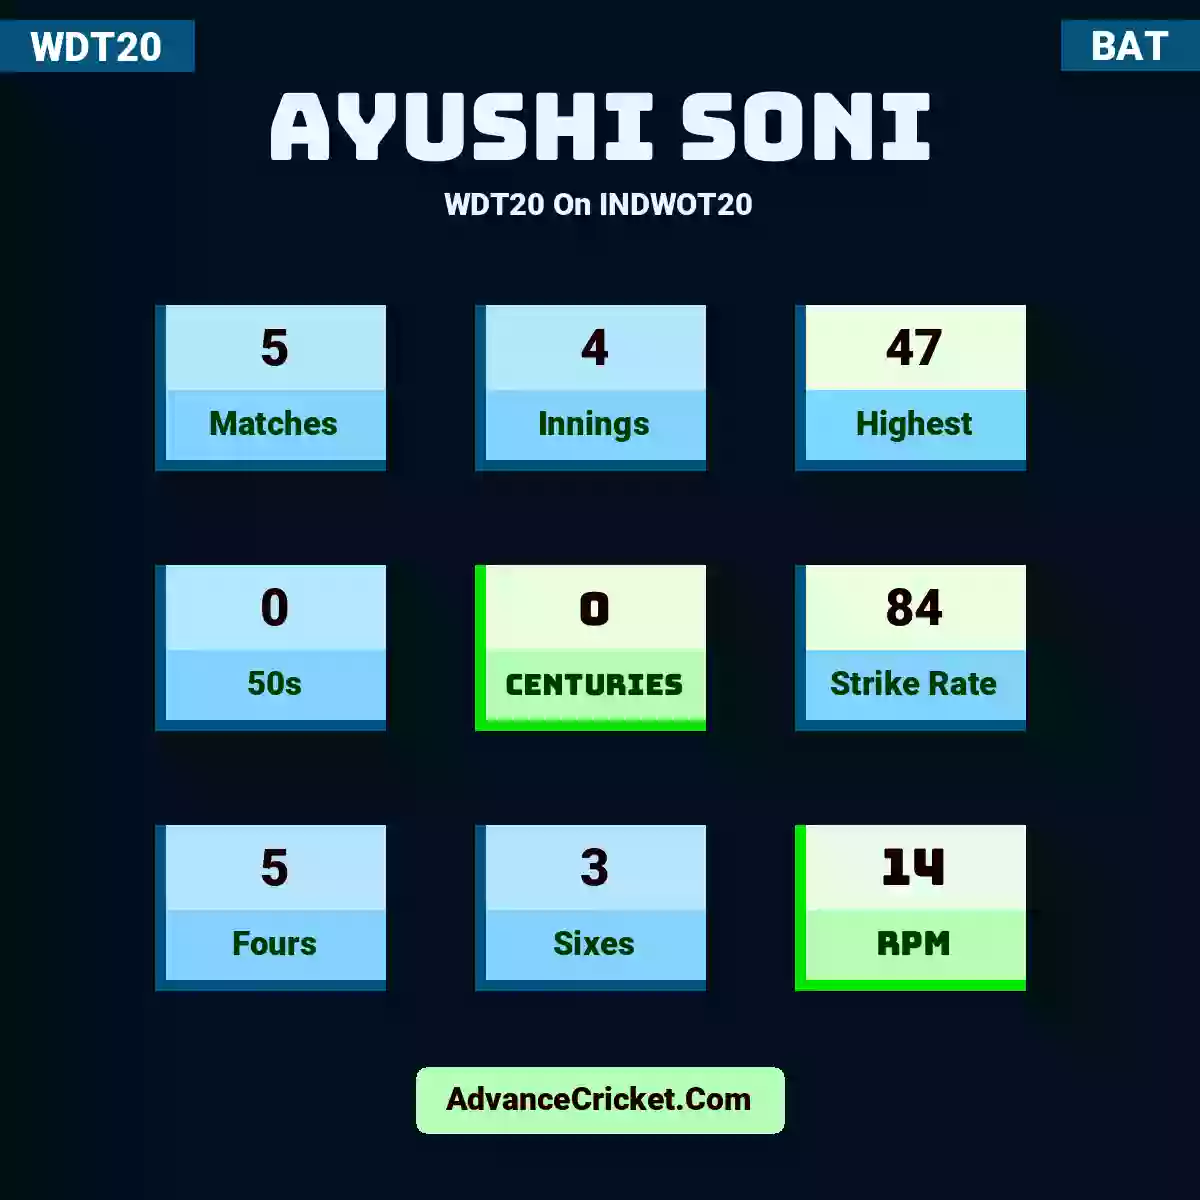 Ayushi soni WDT20  On INDWOT20, Ayushi soni played 5 matches, scored 47 runs as highest, 0 half-centuries, and 0 centuries, with a strike rate of 84. Ay.soni hit 5 fours and 3 sixes, with an RPM of 14.